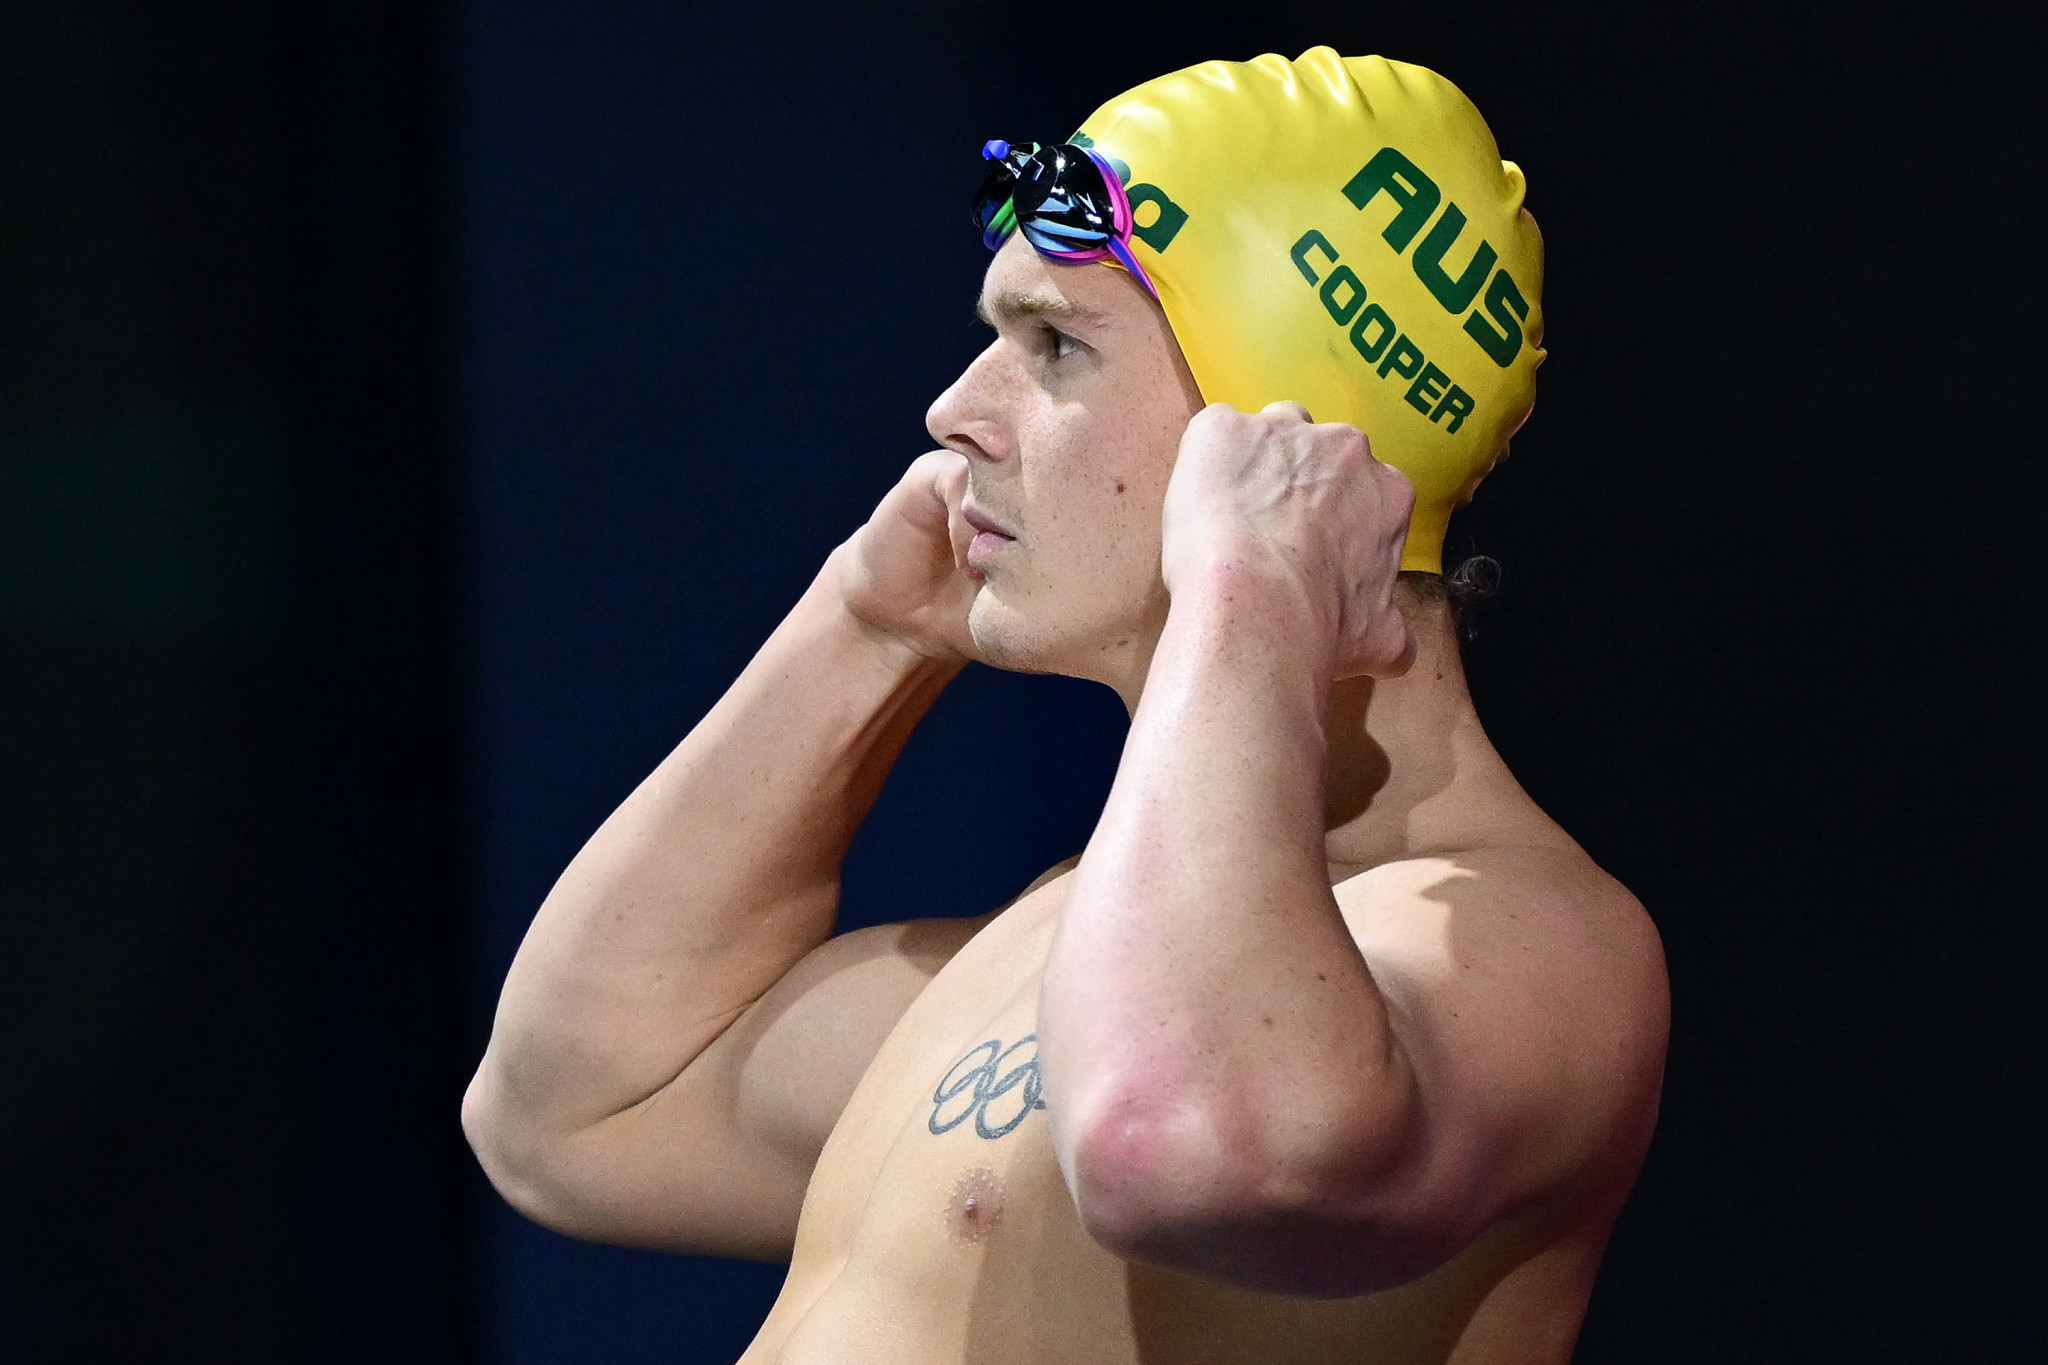 Australian swimmer Cooper ruled out of Birmingham 2022 following "use of medication"